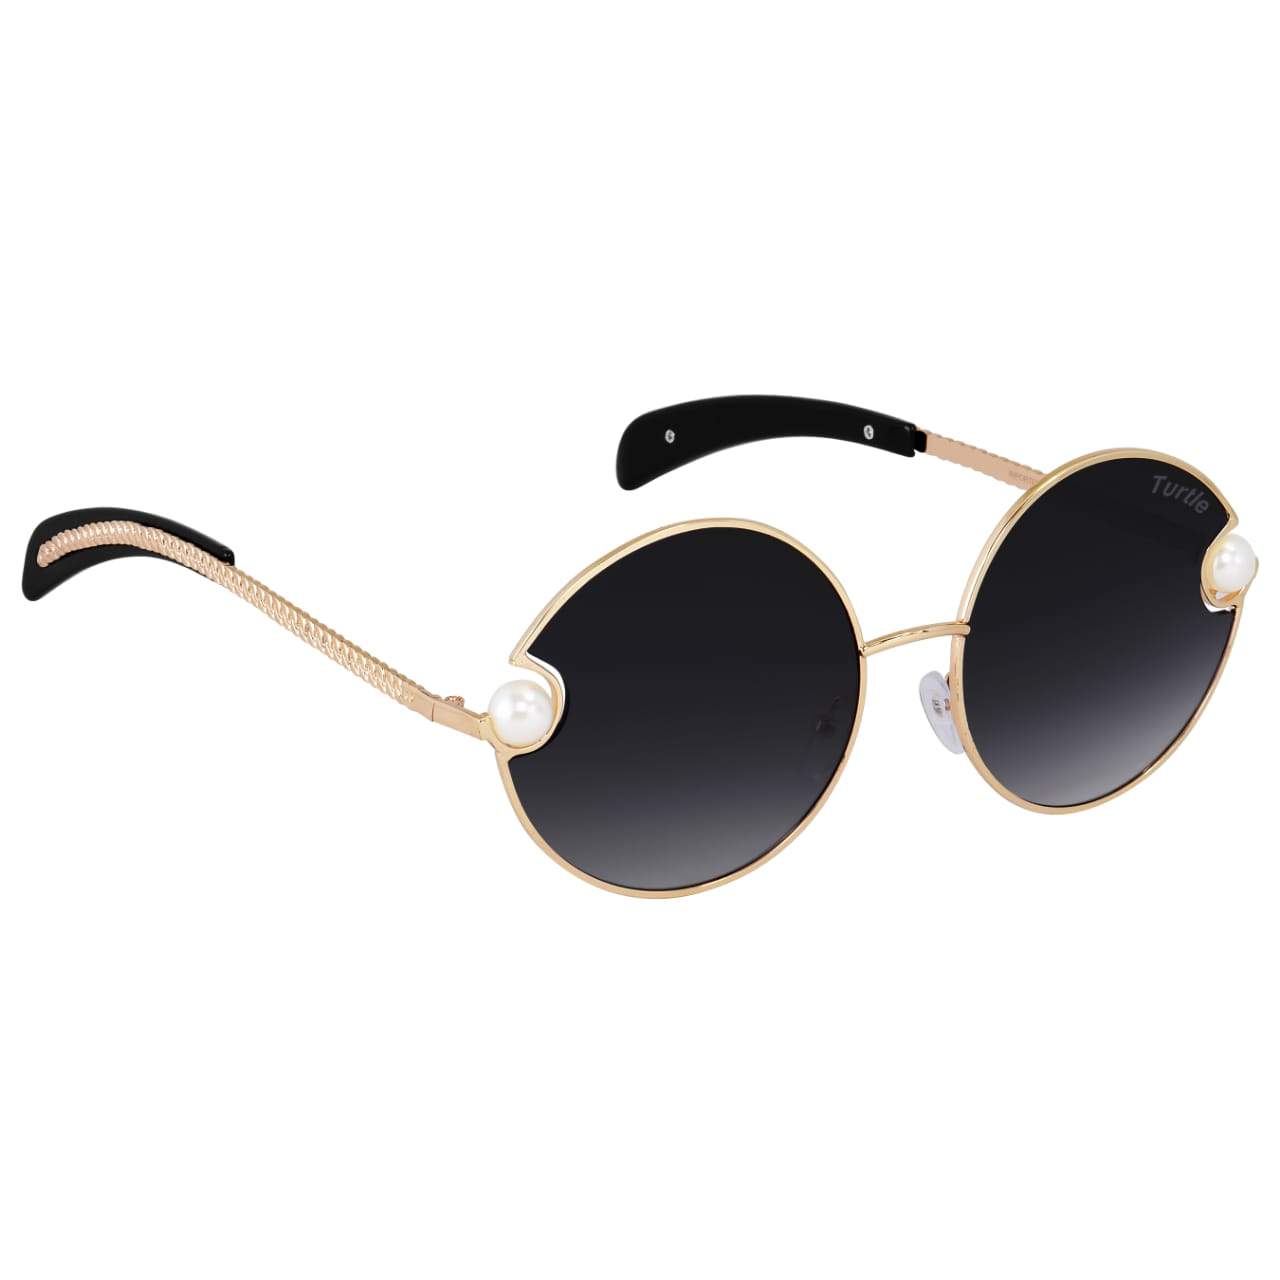 Trendy Round Oversized Black Candy Sunglasses For Women-Unique and Classy